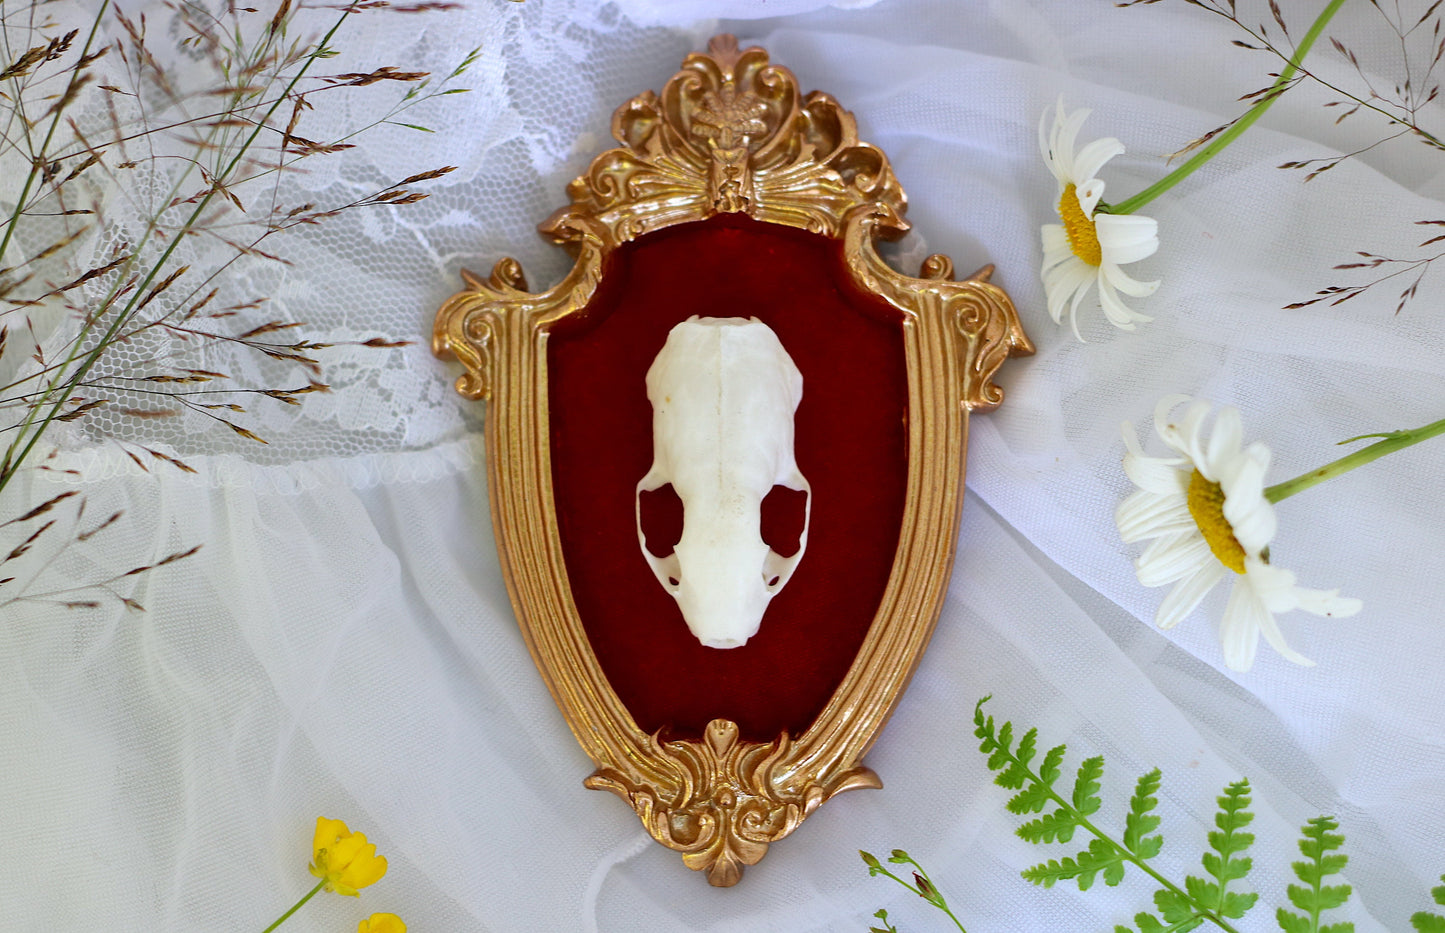 Framed Mink Skull | Real Taxidermy Art in a Victorian Frame | Gothic and Witch Home Decor | Goblincore Oddities & Curiosities Animal Bones